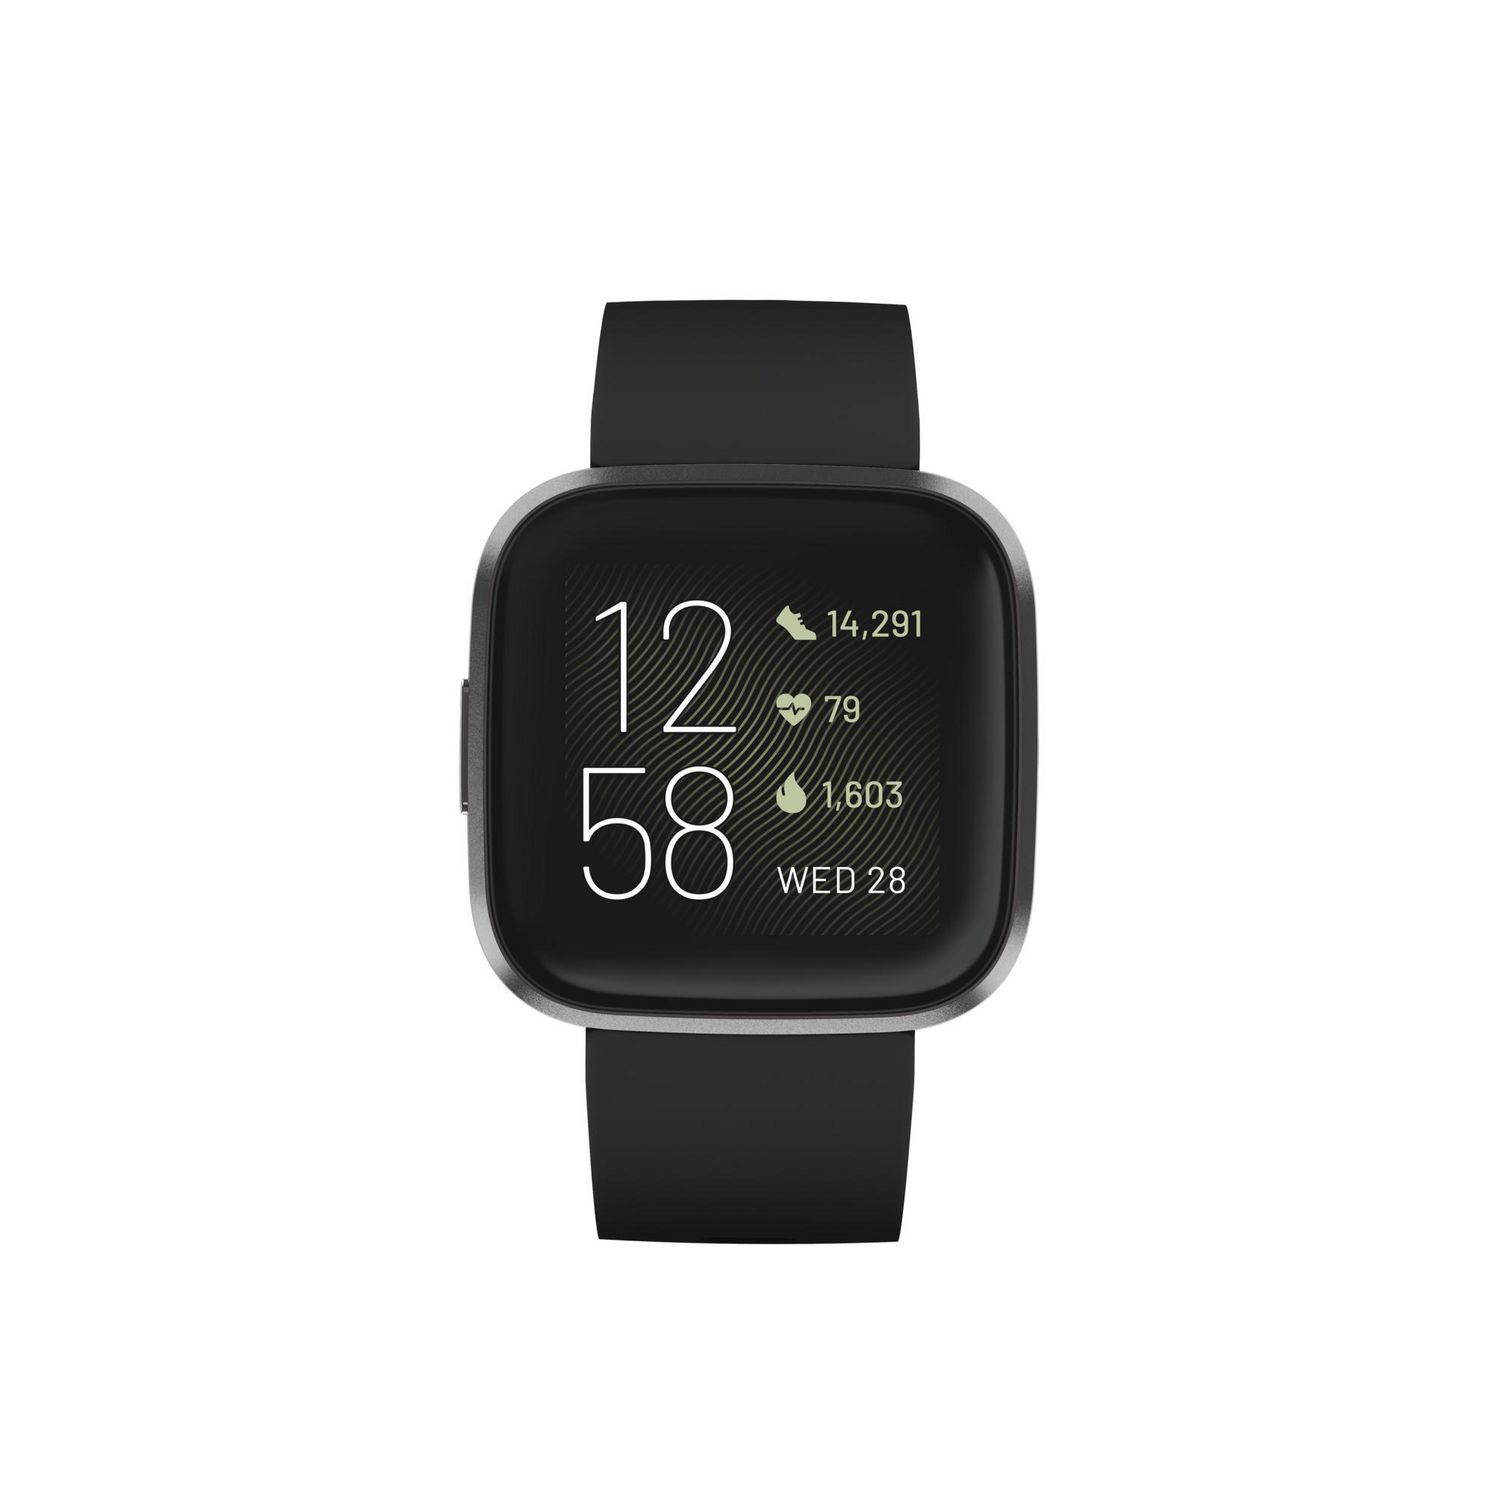 Fitbit Versa 2 Health and Fitness Smartwatch